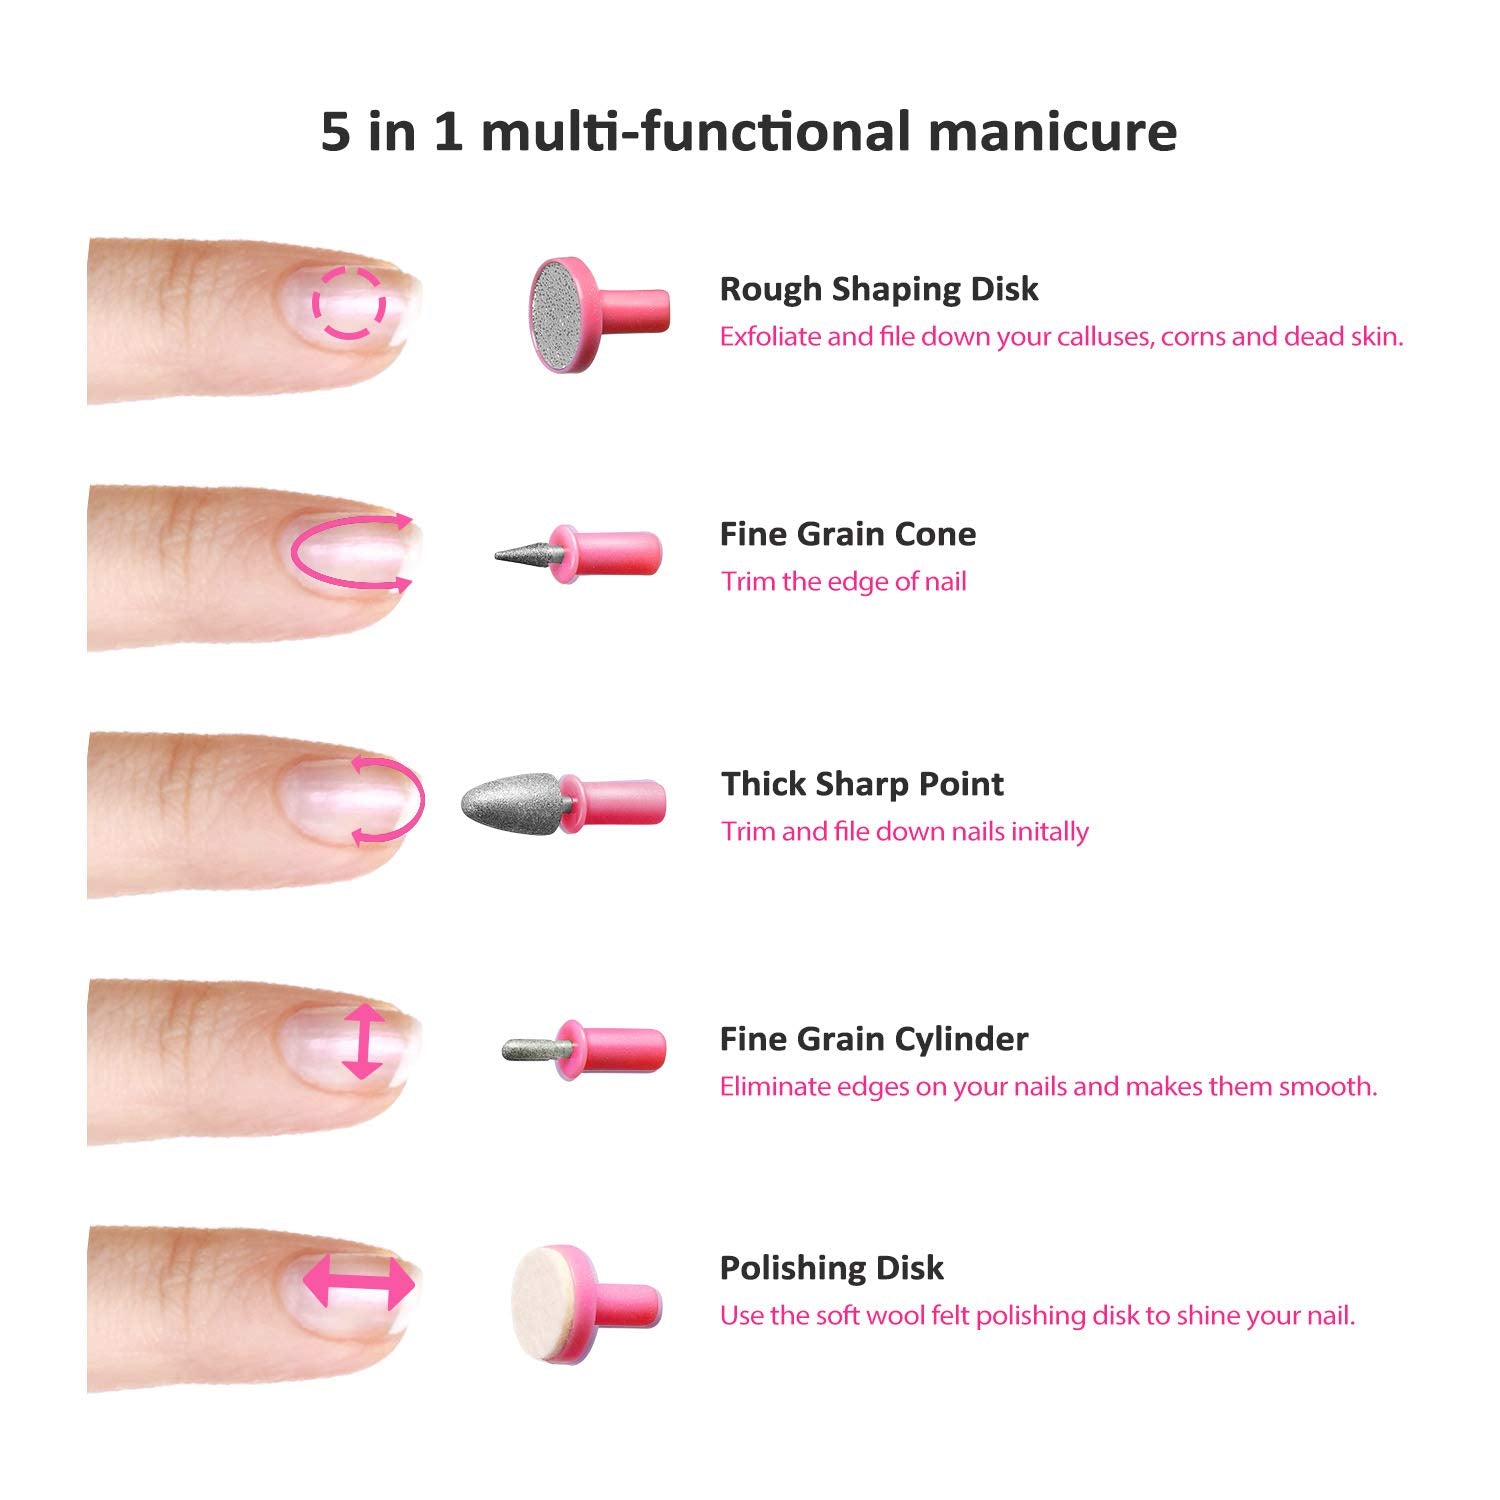 Nail Buffer 5 pcs set 100/180 Grit Nail Files Sand Paper Foam Manicure tool  For Home And Salon use only Under Professionals.